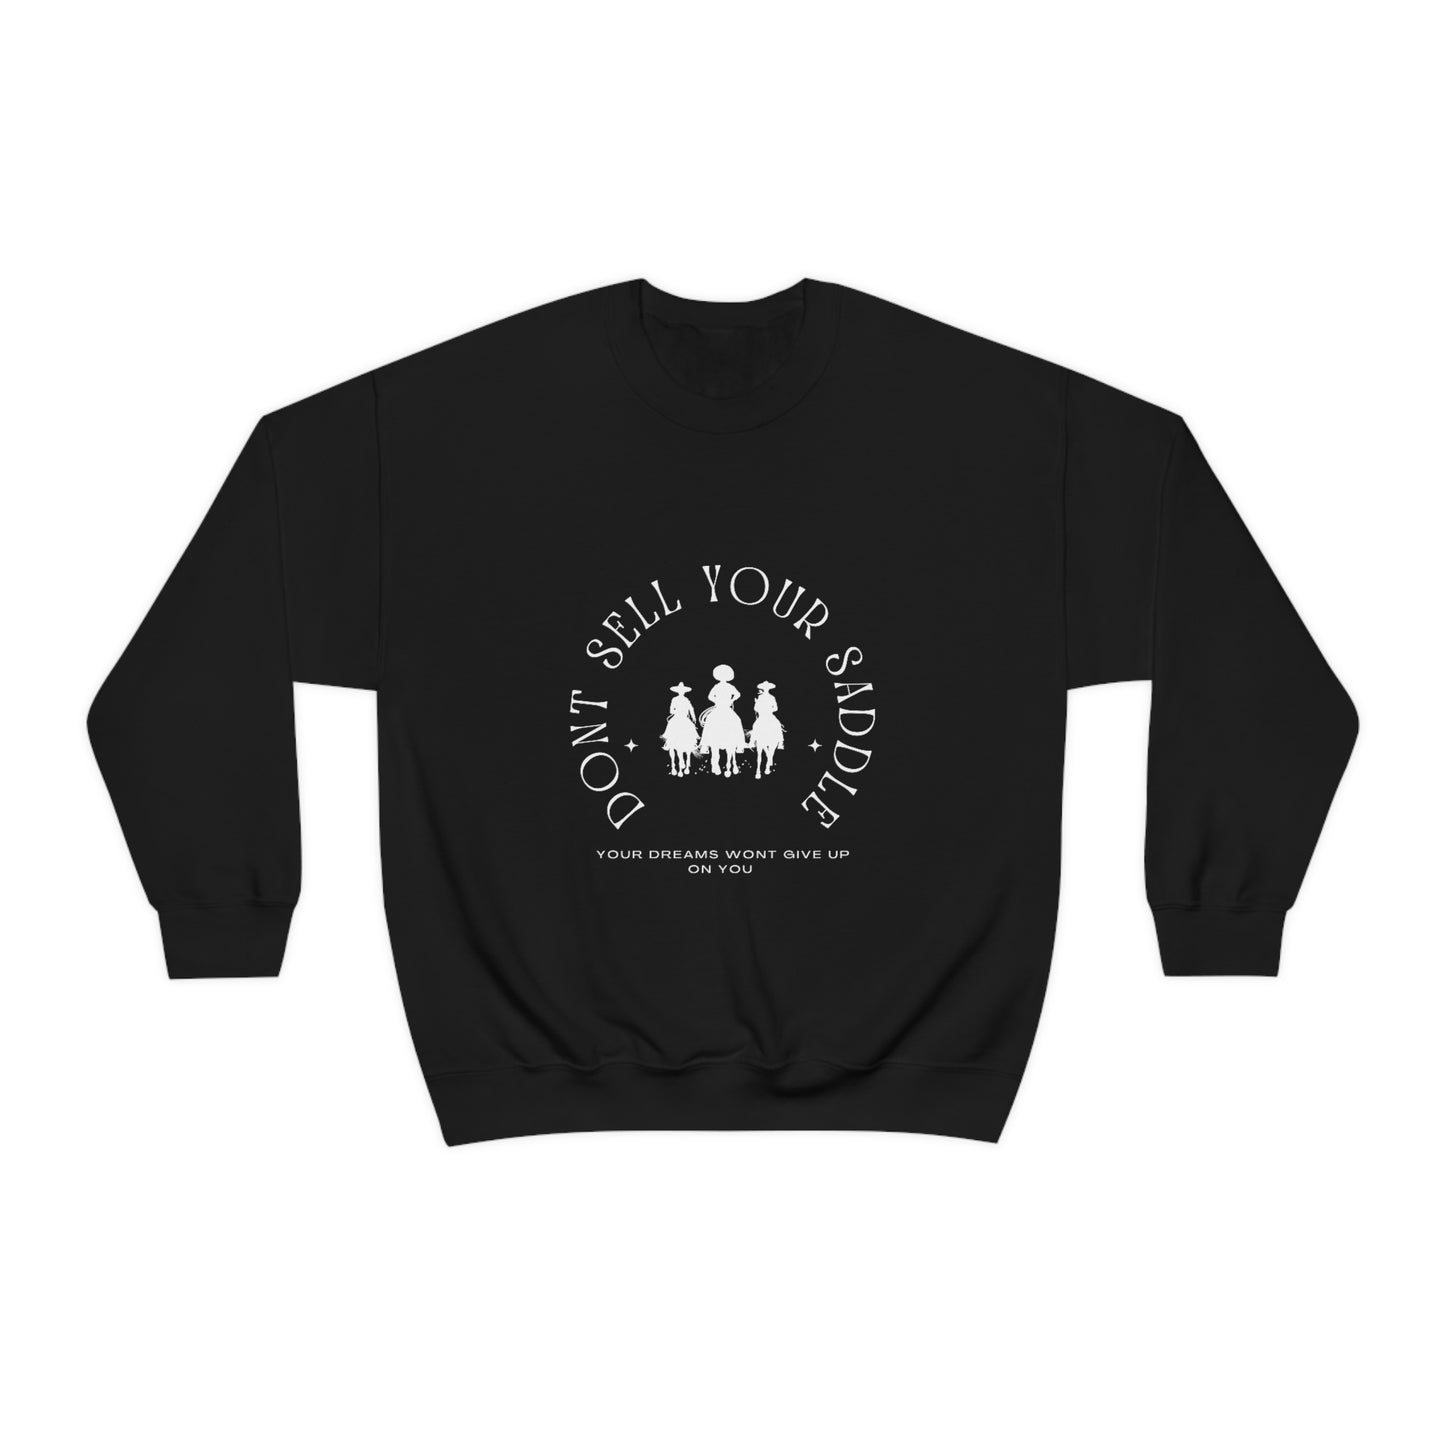 Don't Sell Your Saddle Crewneck